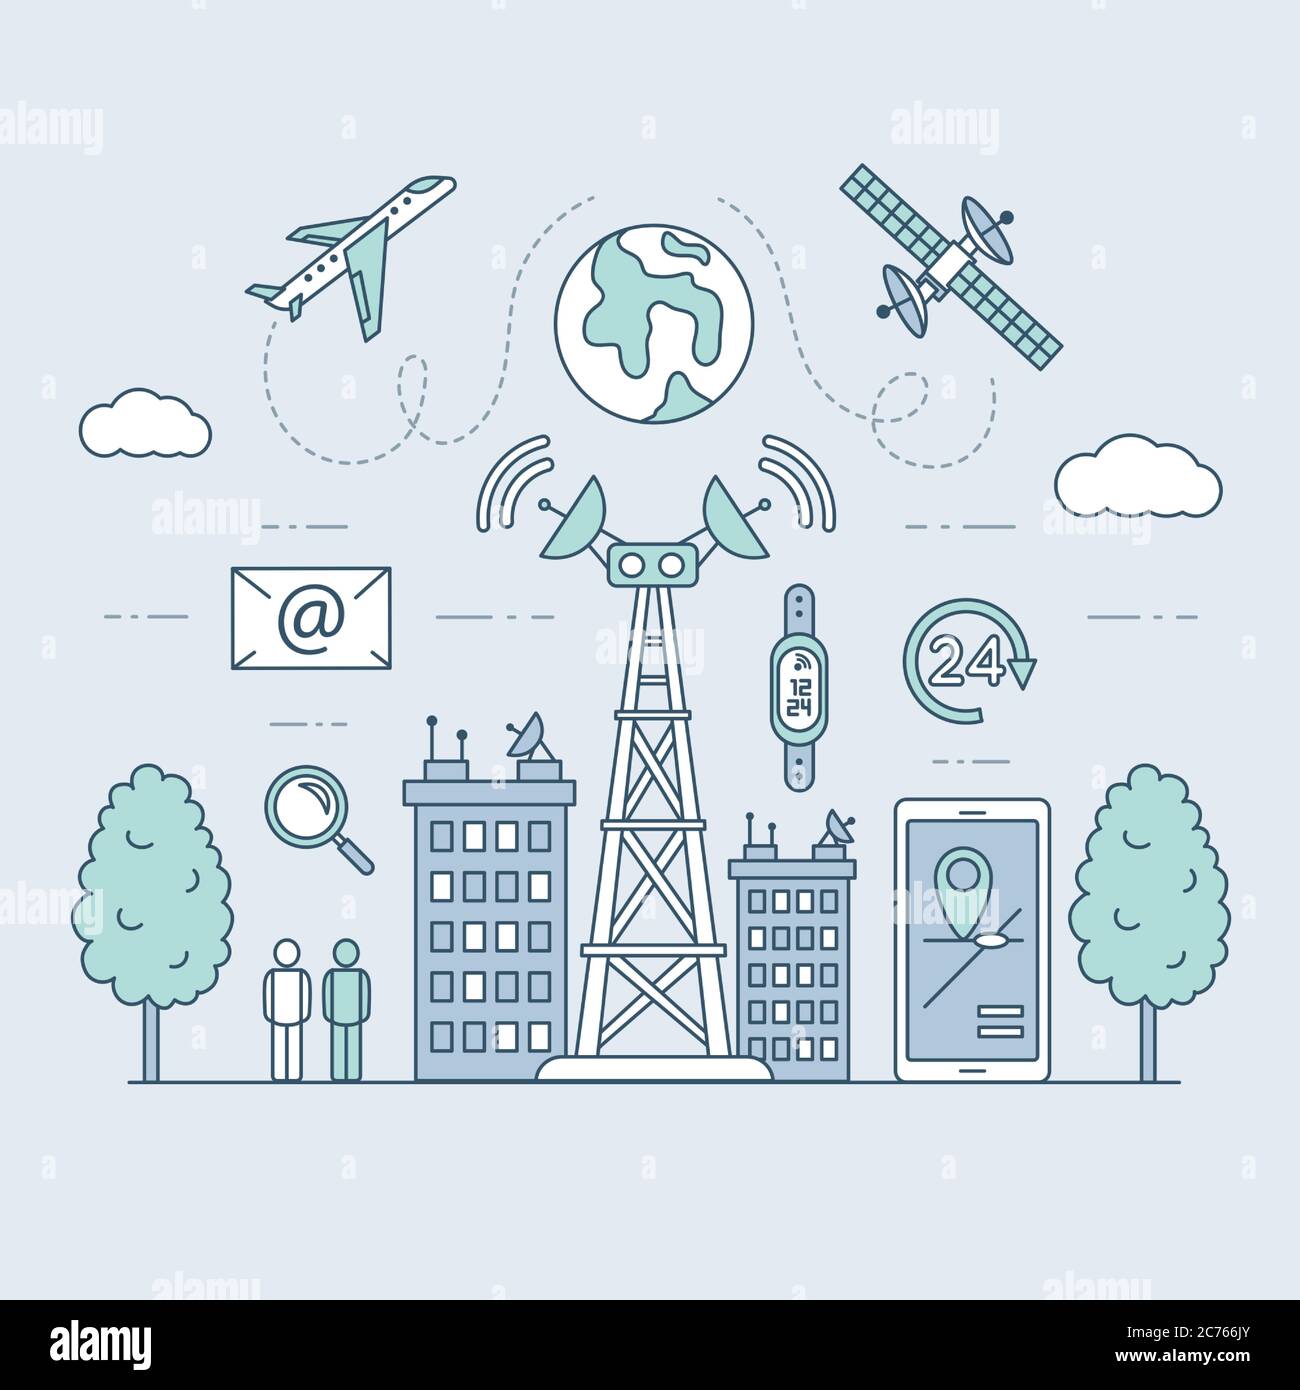 Transmission cellular tower or mobile communications tower on city landscape. Smartwatch, smartphone, satellite, plane, and homes using wireless communication vector cartoon outline illustration. Stock Vector